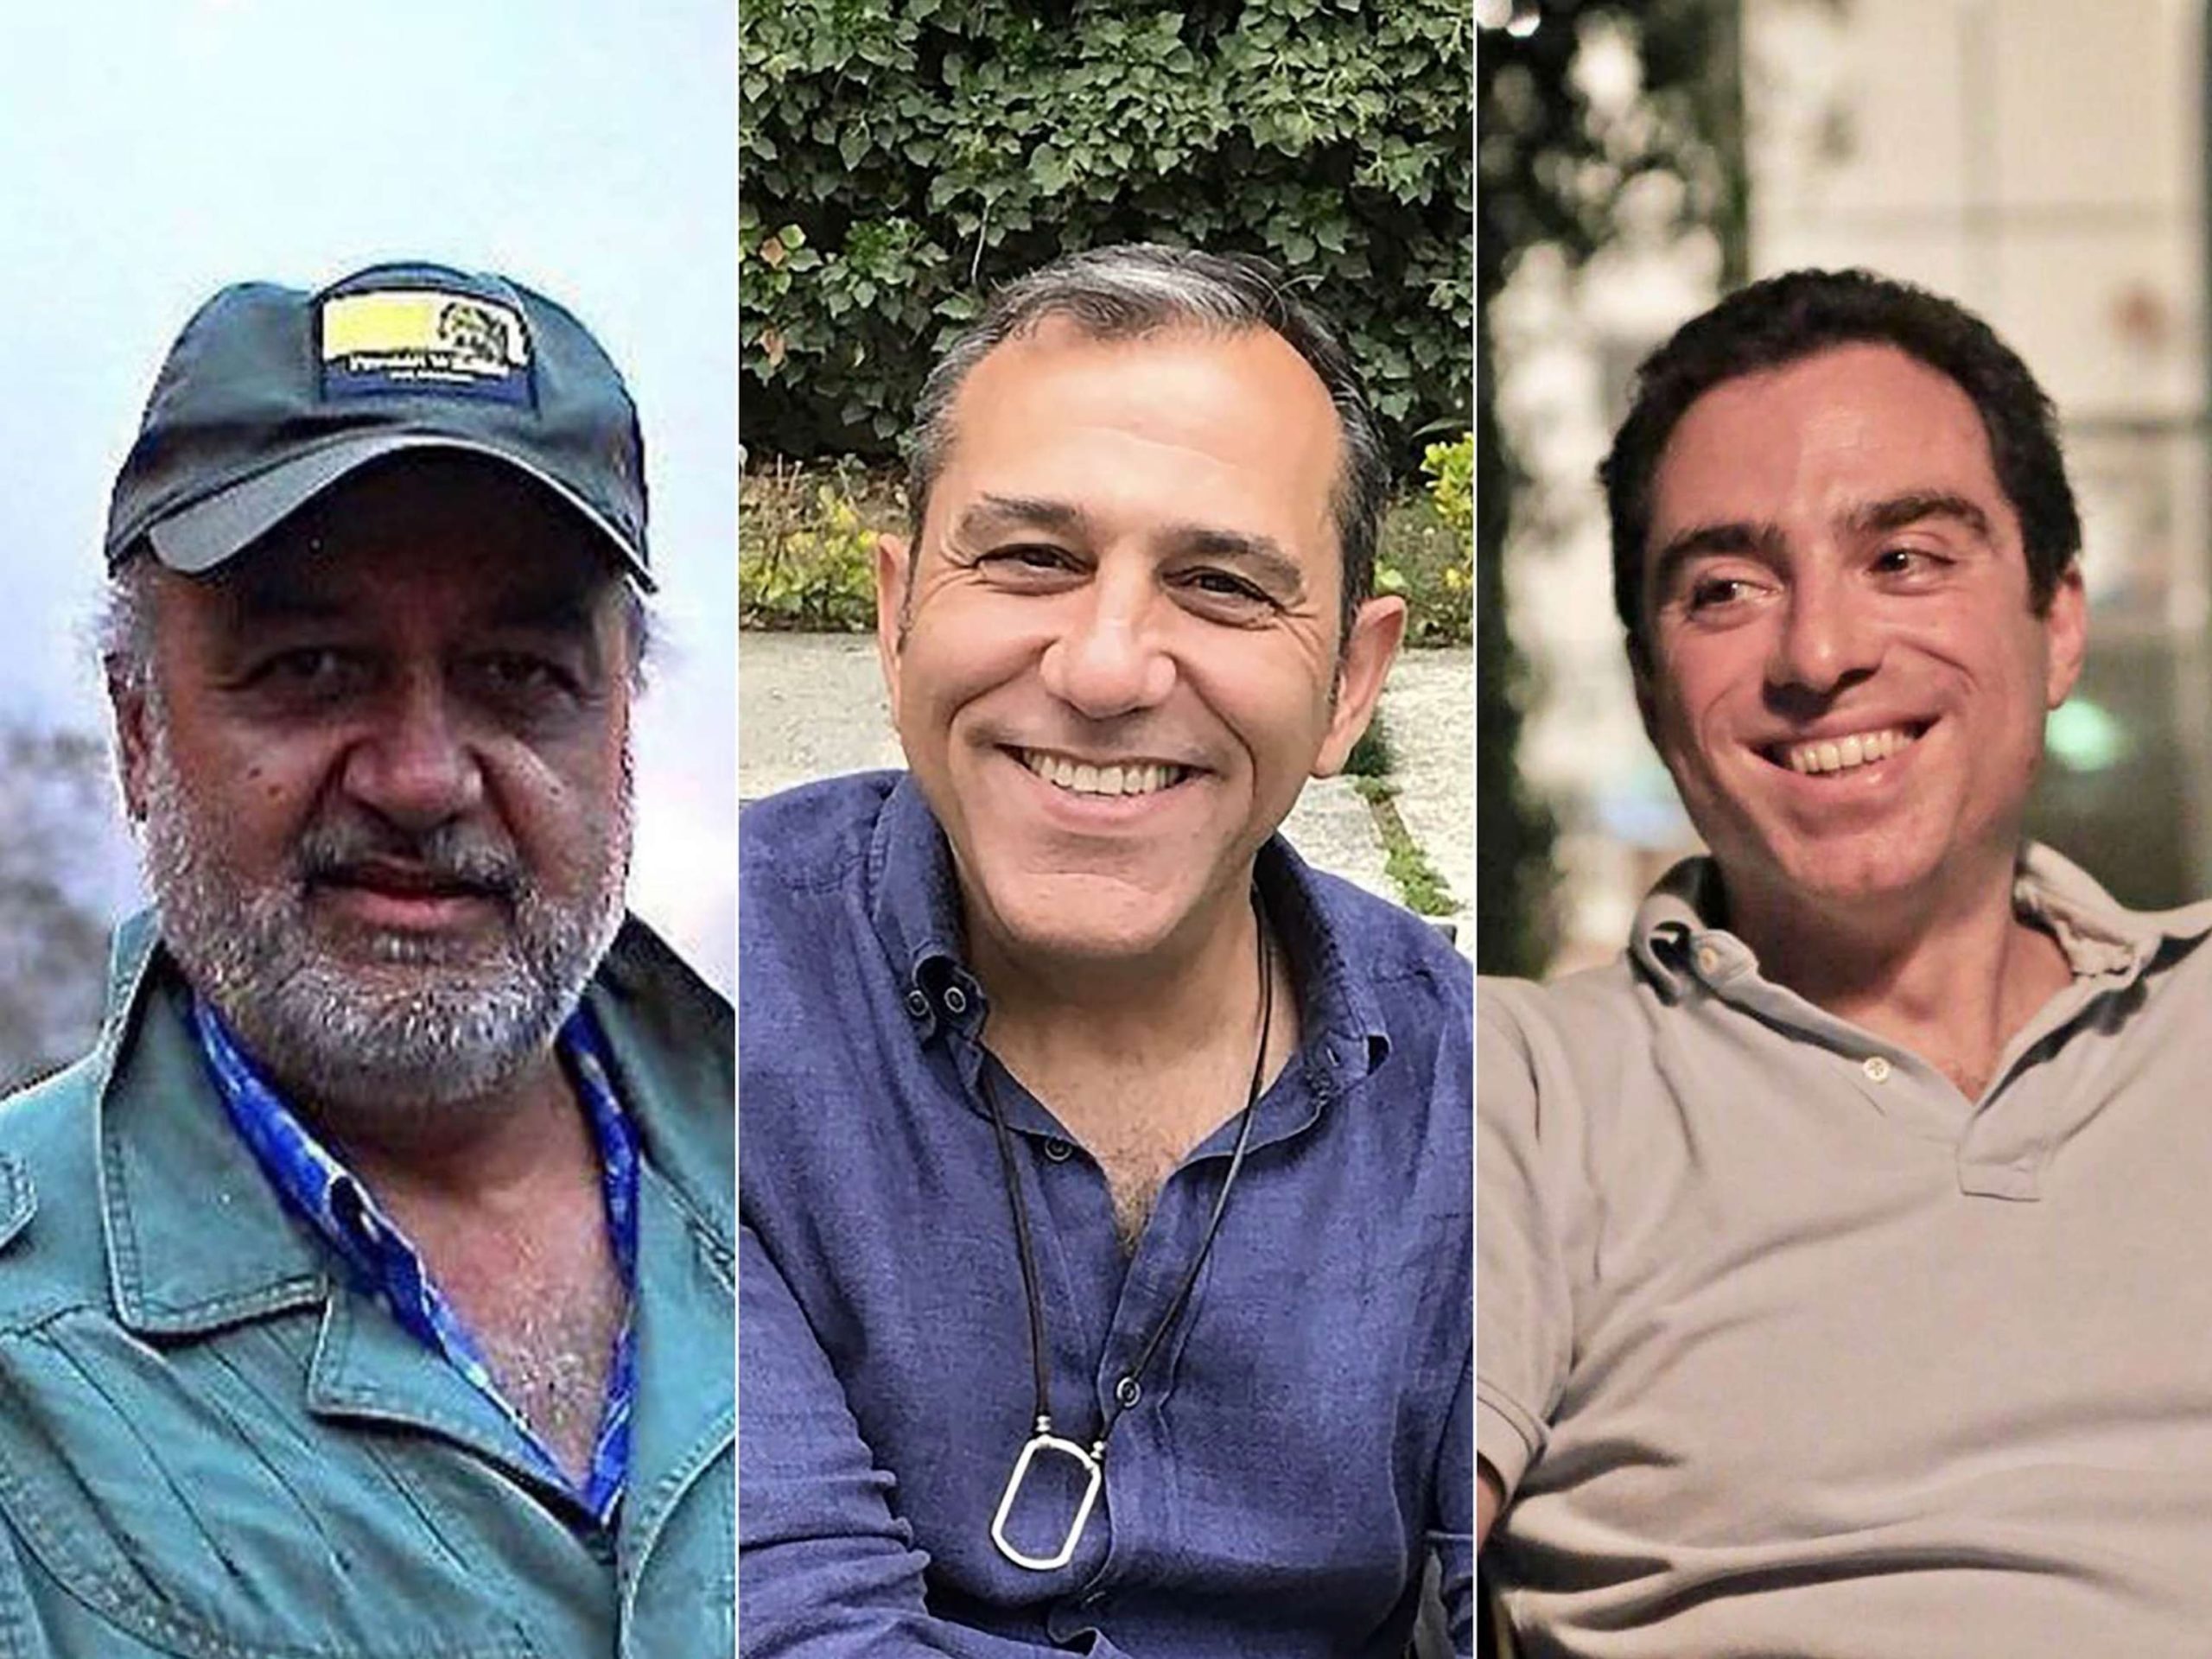 Iran Foreign Ministry announces the release of 5 detained Americans on Monday